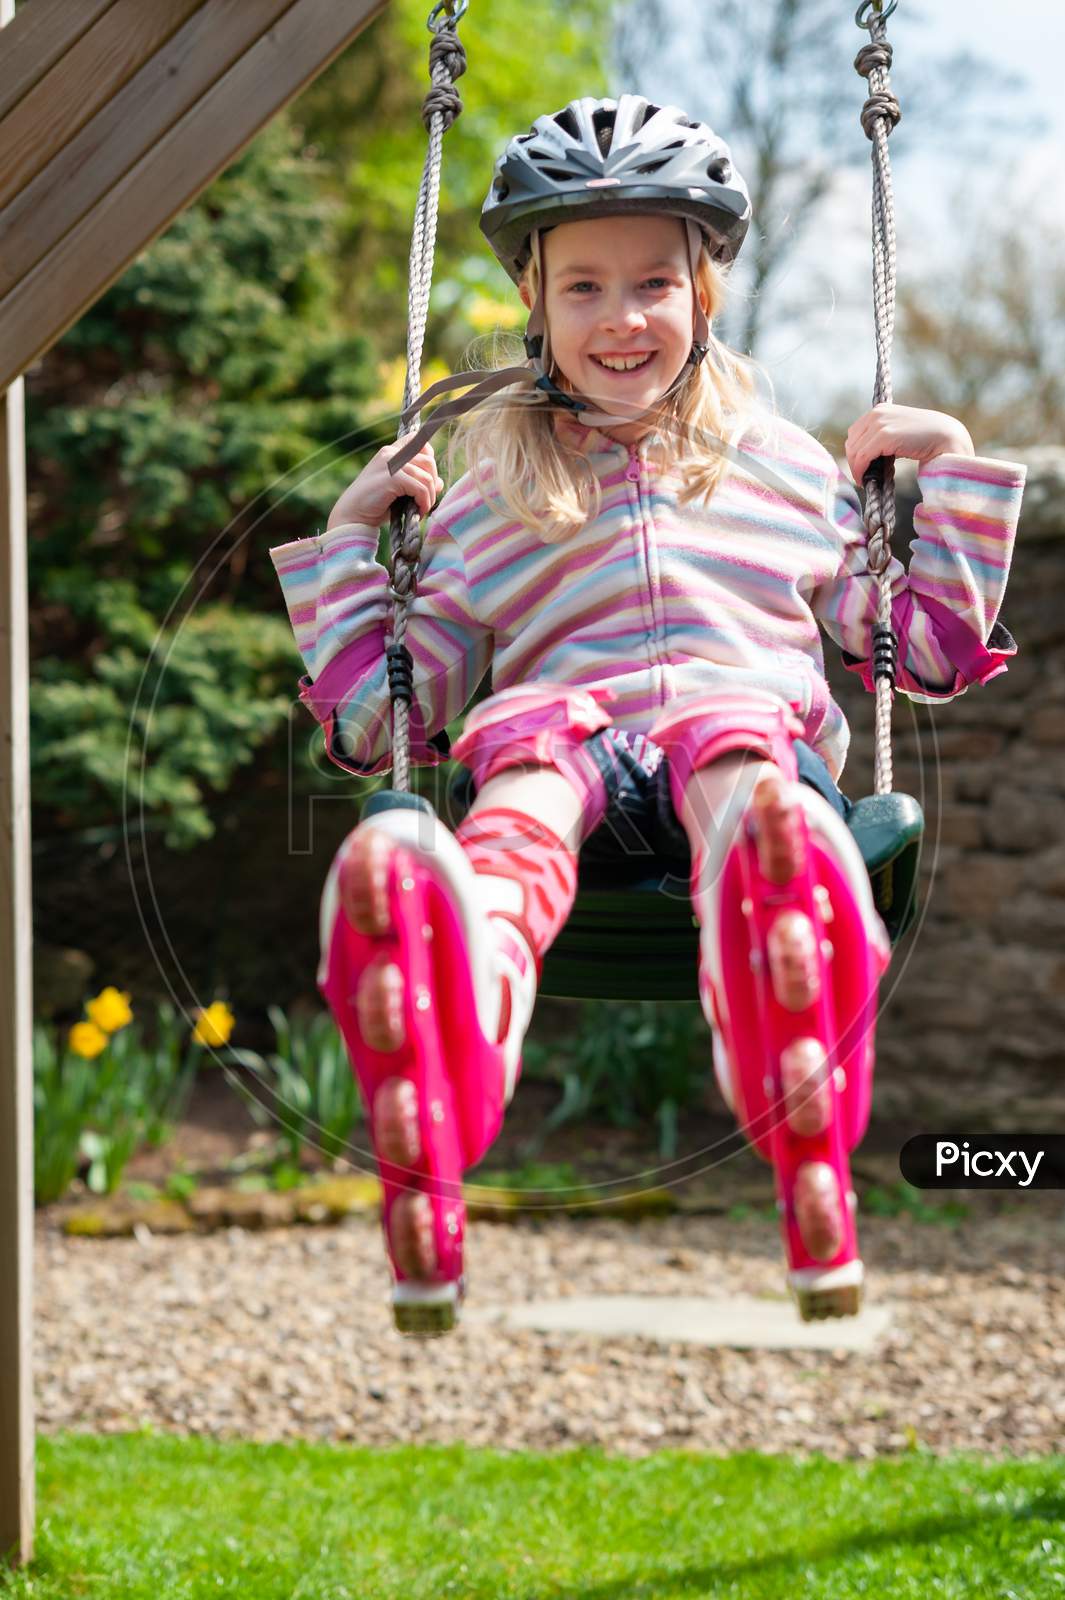 A Smiling Young Blonde Girl Wearing Roller Blades And Helmet While Swinging On Garden Swing